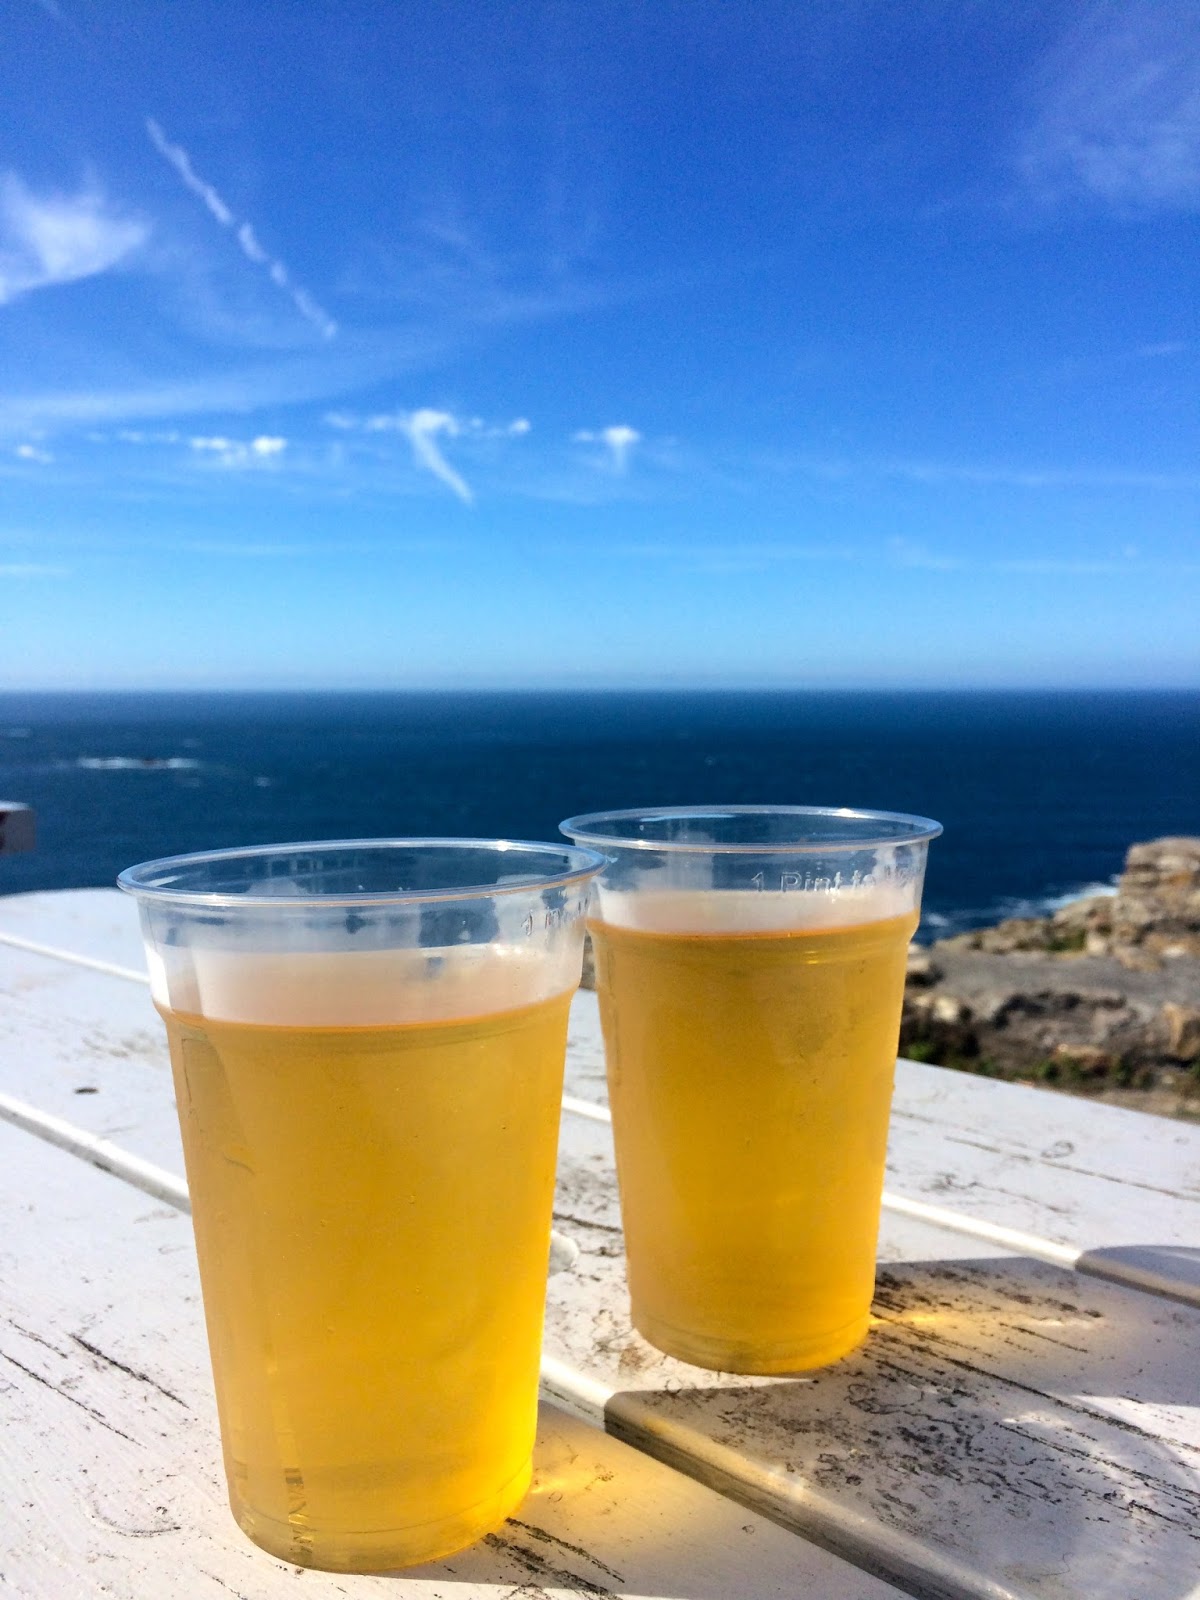 Things to do in Cornwall, Cornwall guide, lifestyle blog, Land's End